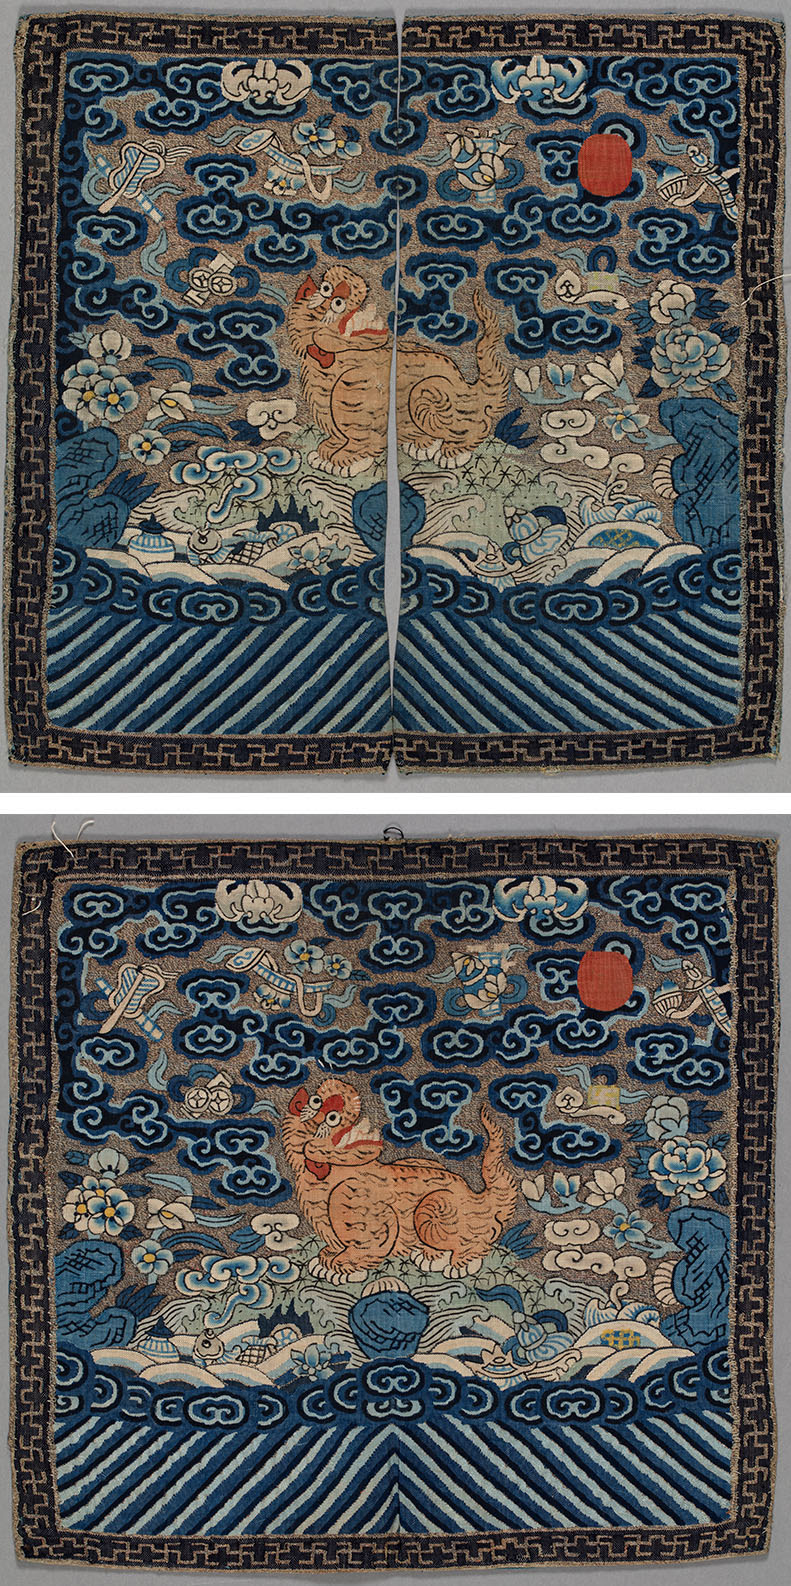 Two square textiles showing the same image of a tiger on a hill looking over his shoulder at the sun in the top right corner of the textile. One square textile has a slit up the centre dividing the textile into two parts.